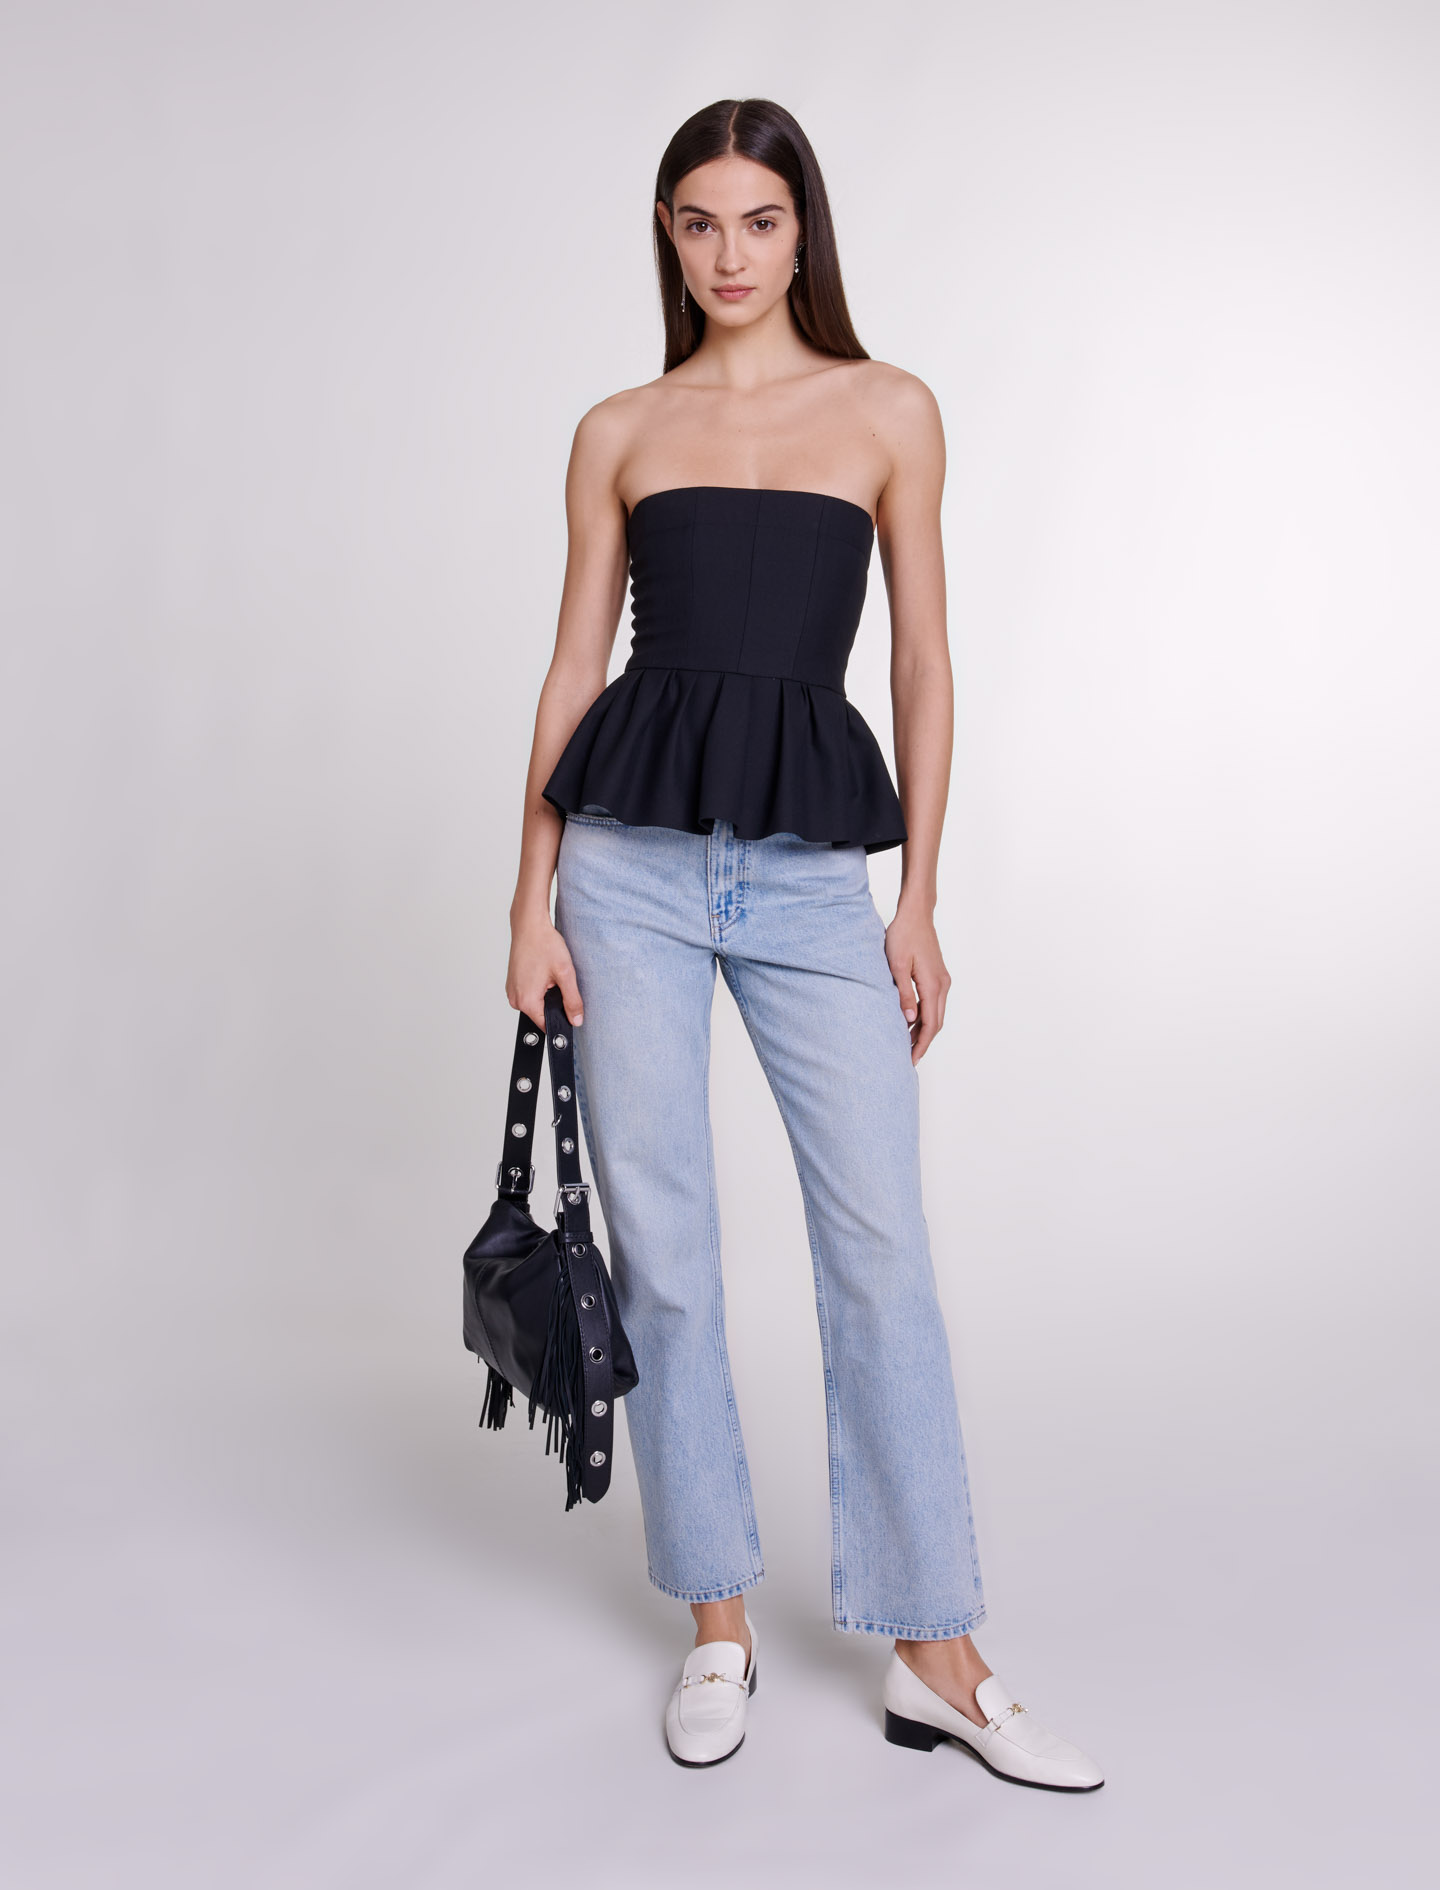 Shop Maje Bustier Top With Basque For Fall/winter In Black